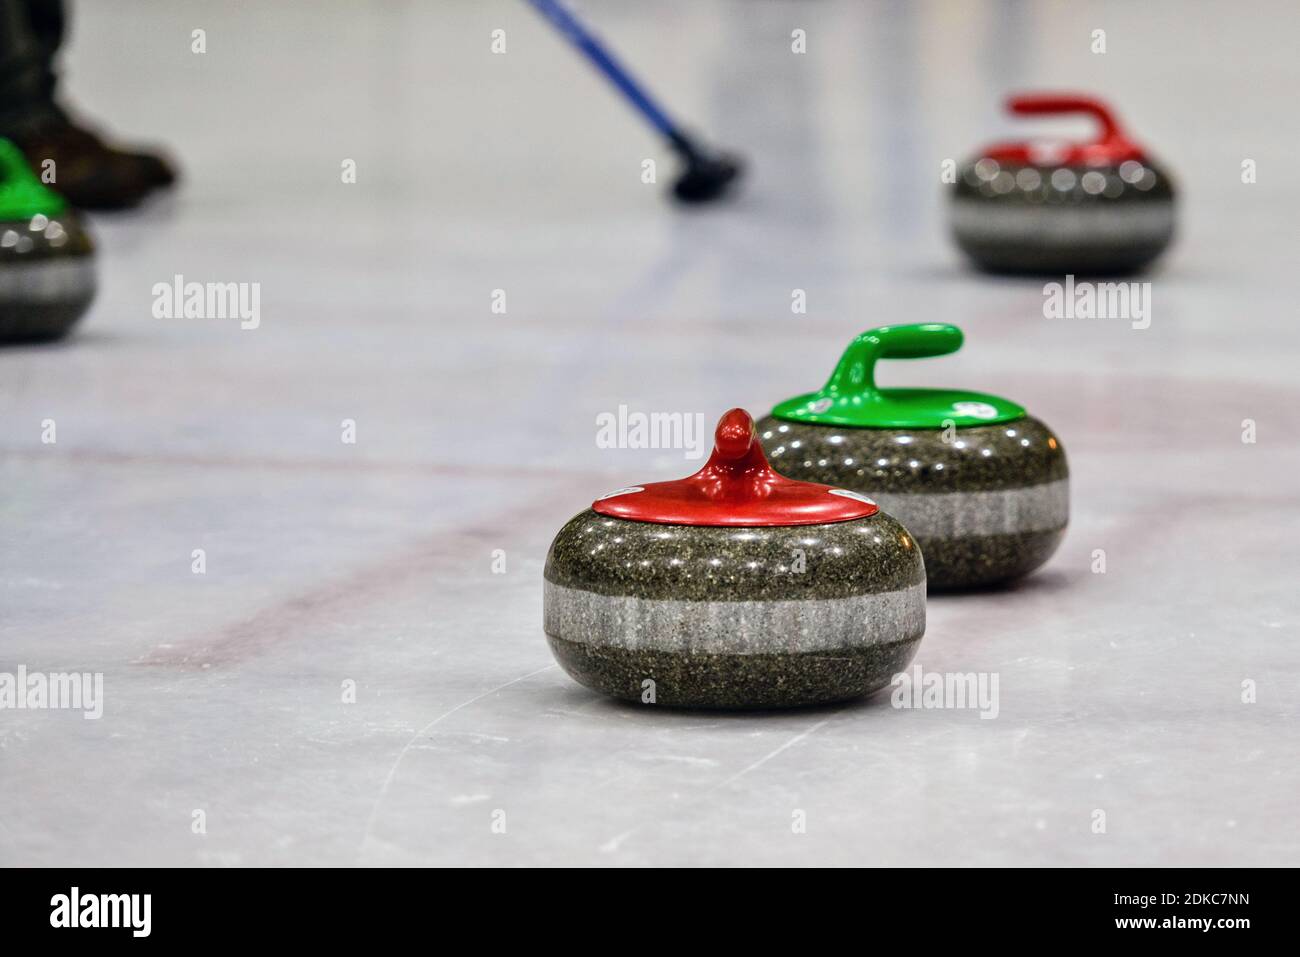 Close-up Of Curling Stones On Ice Rink Stock Photo